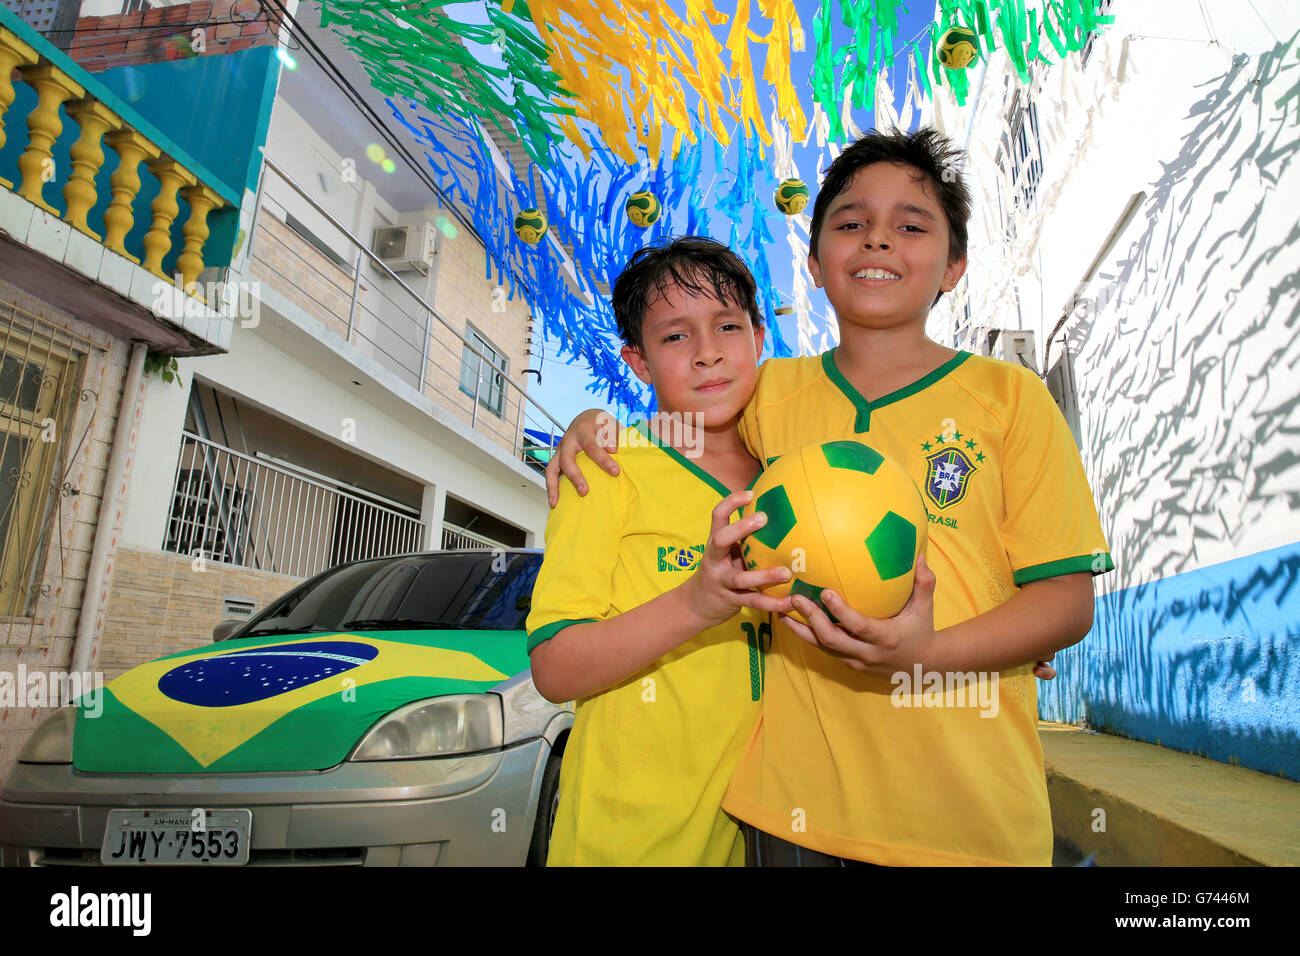 Young locals hold a football in the streets of Manaus before the FIFA World Cup, Group D match at the Arena da Amazonia, Manaus, Brazil. Stock Photo